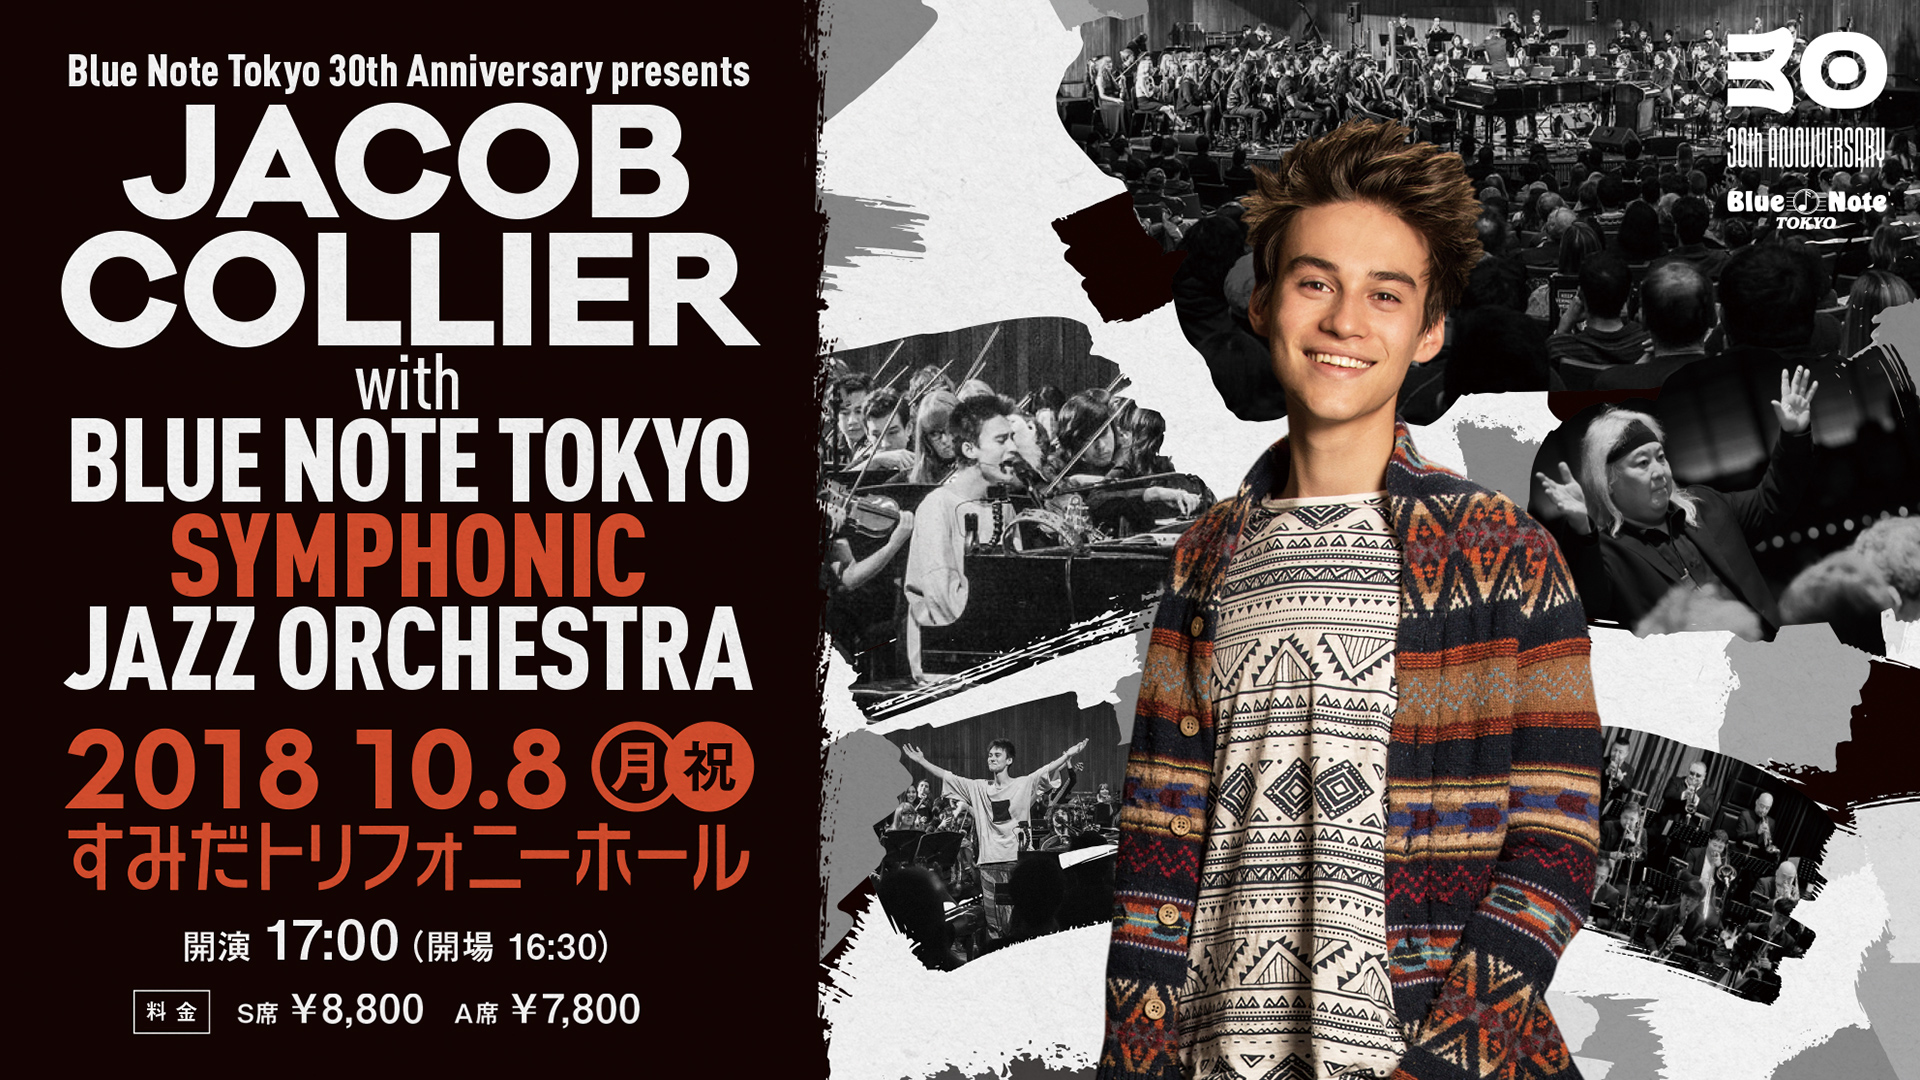 20181008JACOBCOLLIER_image05.jpg